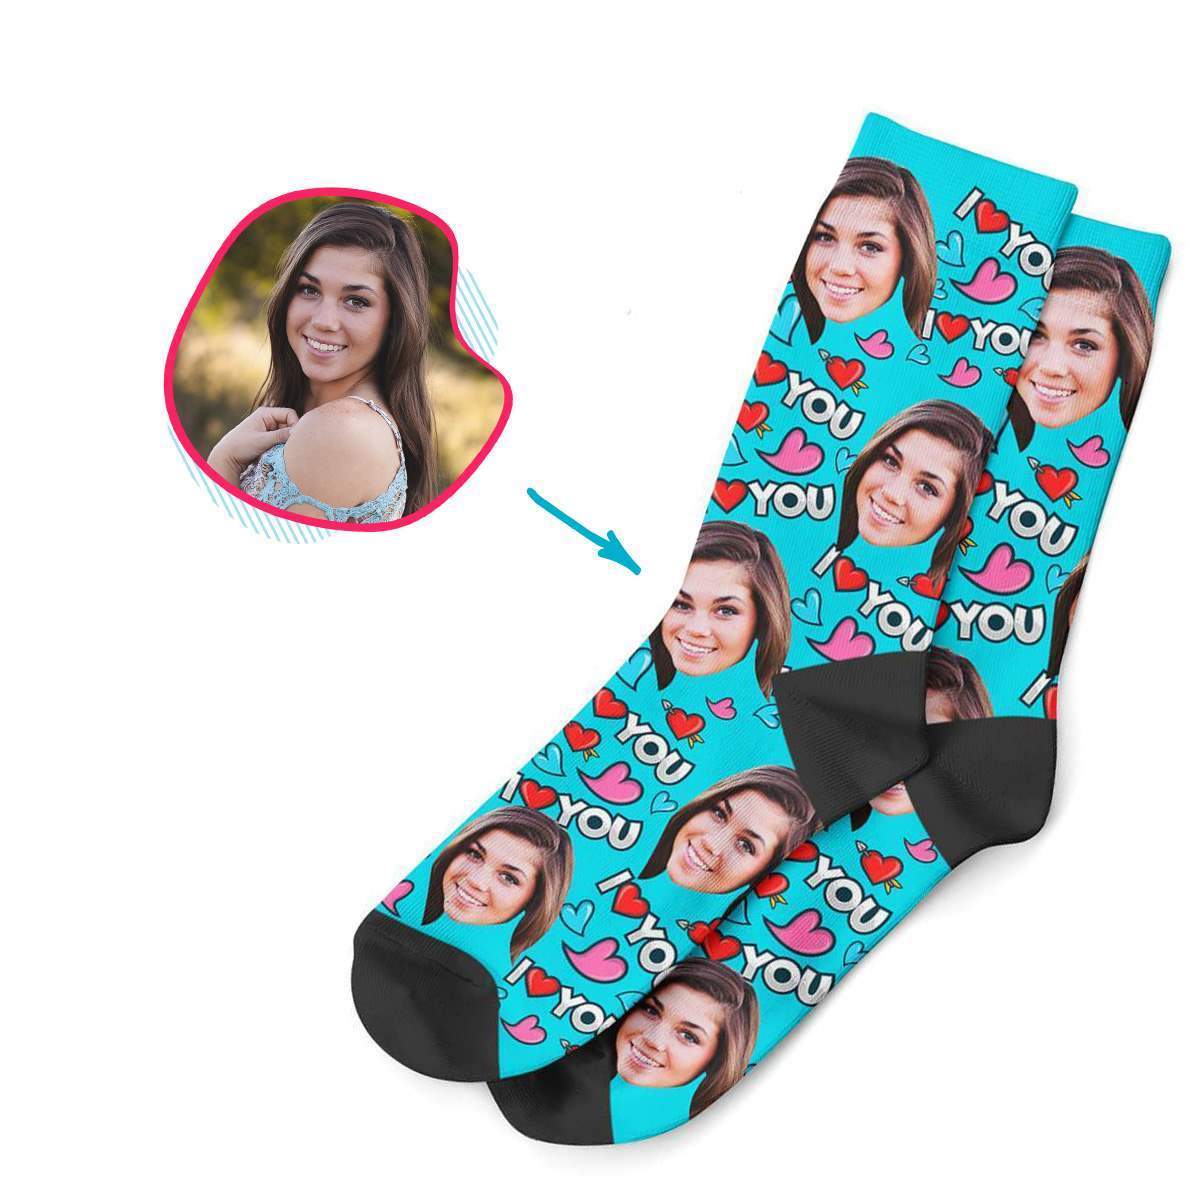 blue Love You socks personalized with photo of face printed on them